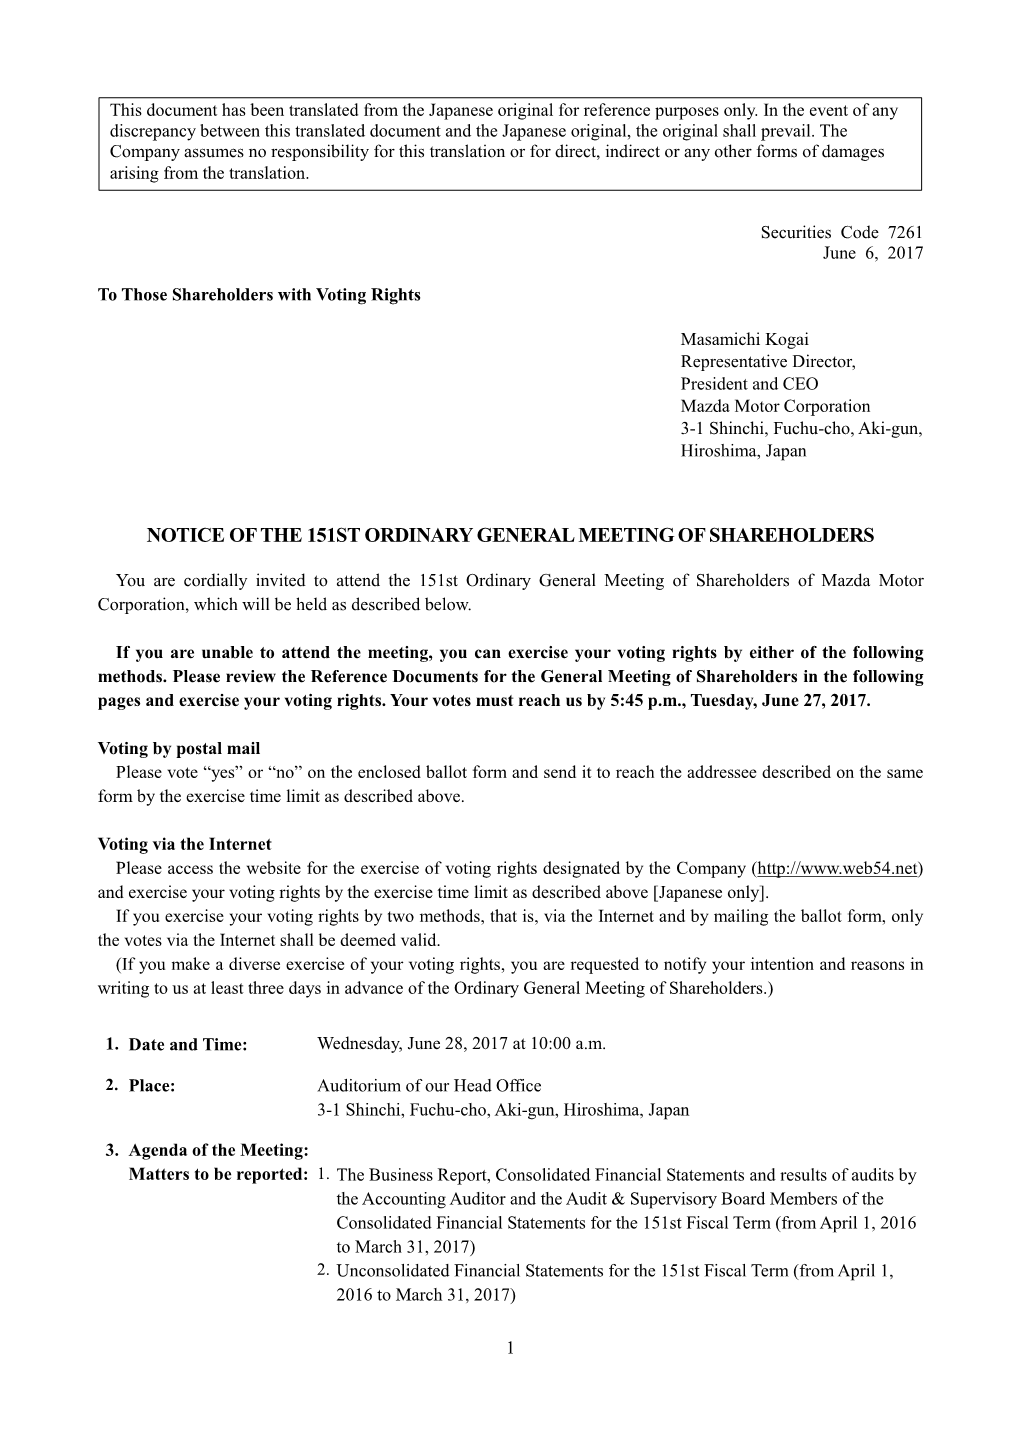 Notice of the 151St Ordinary General Meeting of Shareholders